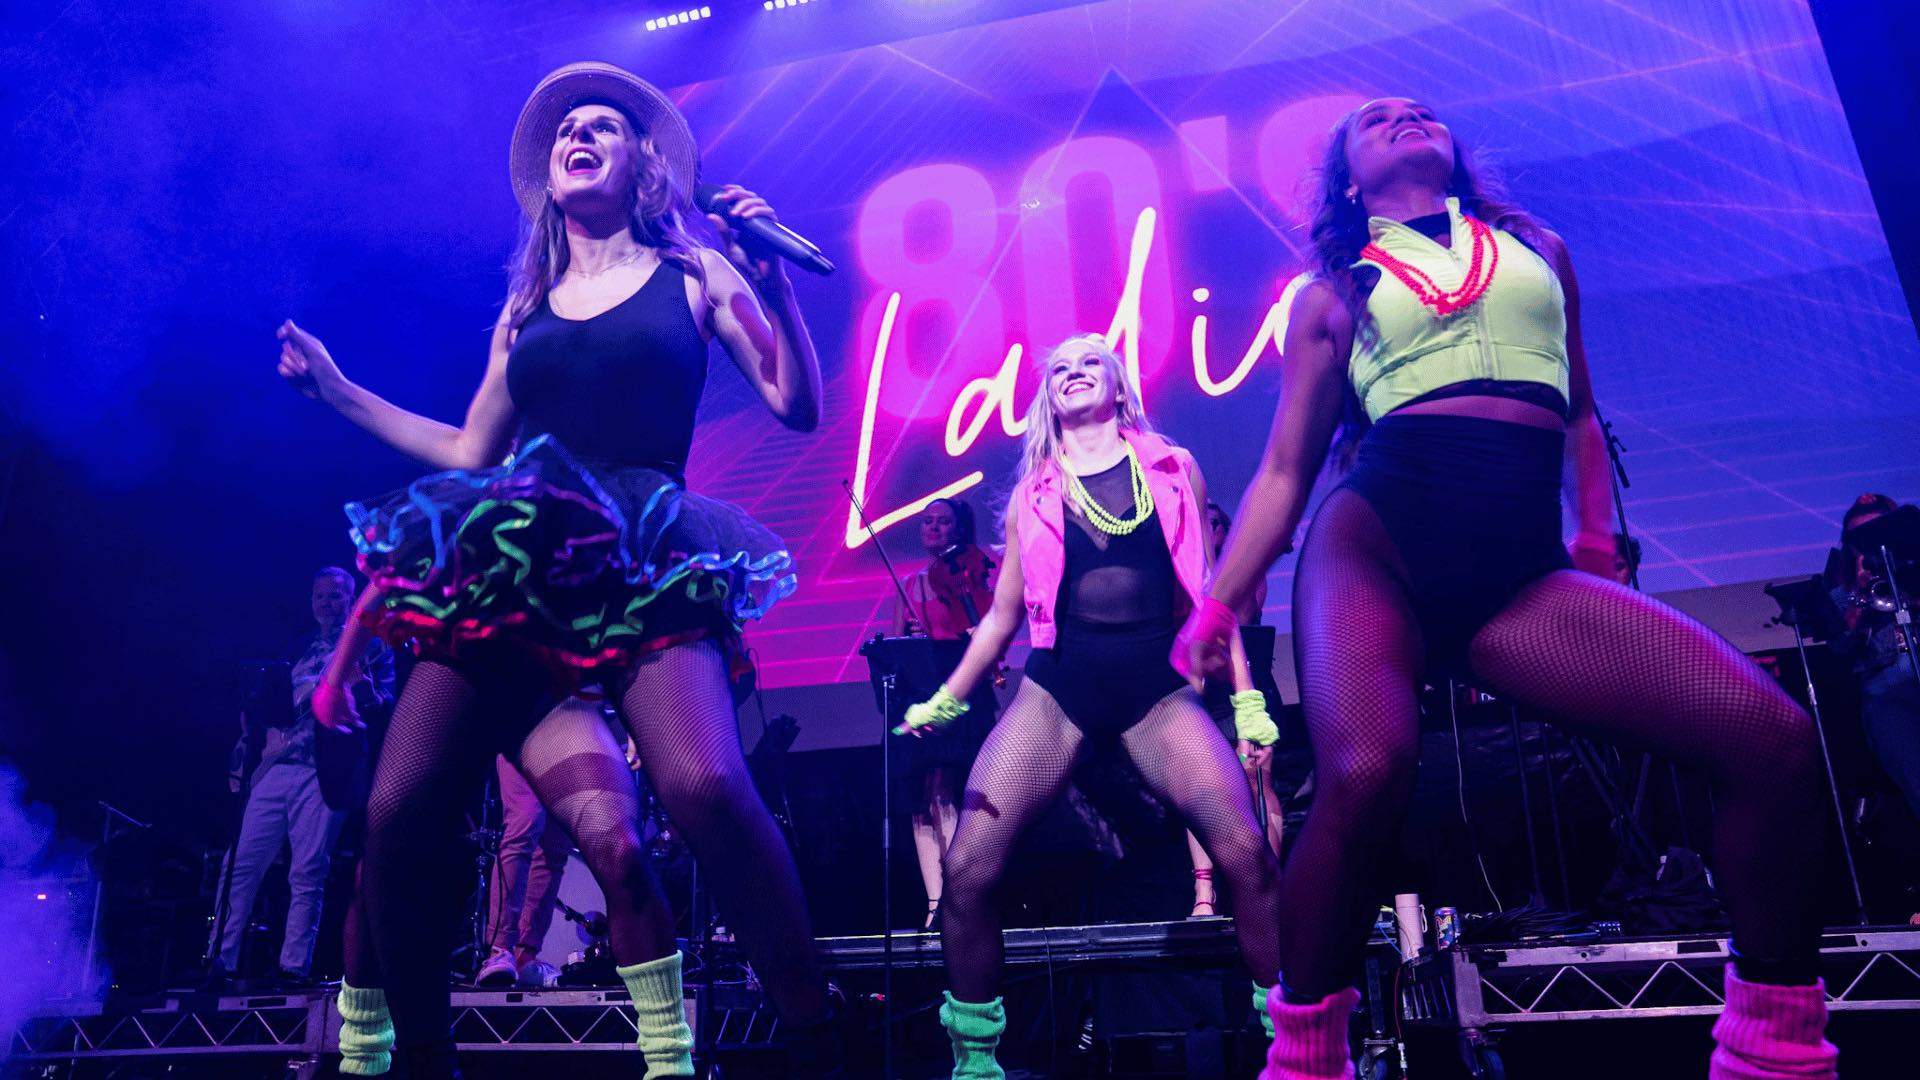 The 80s Ladies performing on stage.